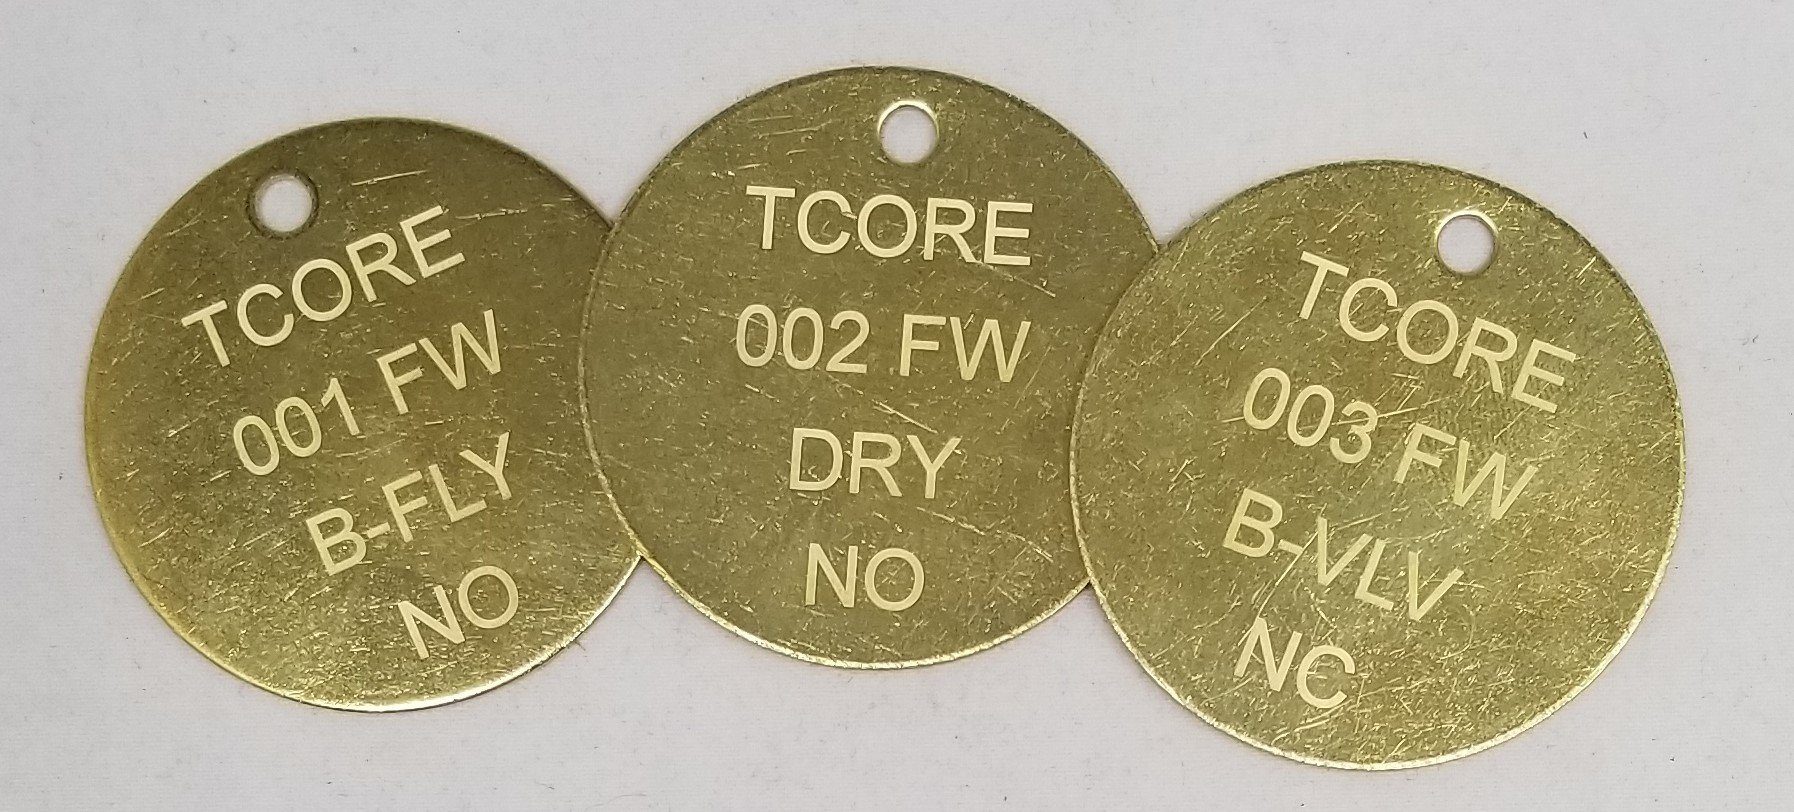 Brass Identification/Equipment Tags, Laser Marked 1 1/4" Brass Tags Craftworks NW 